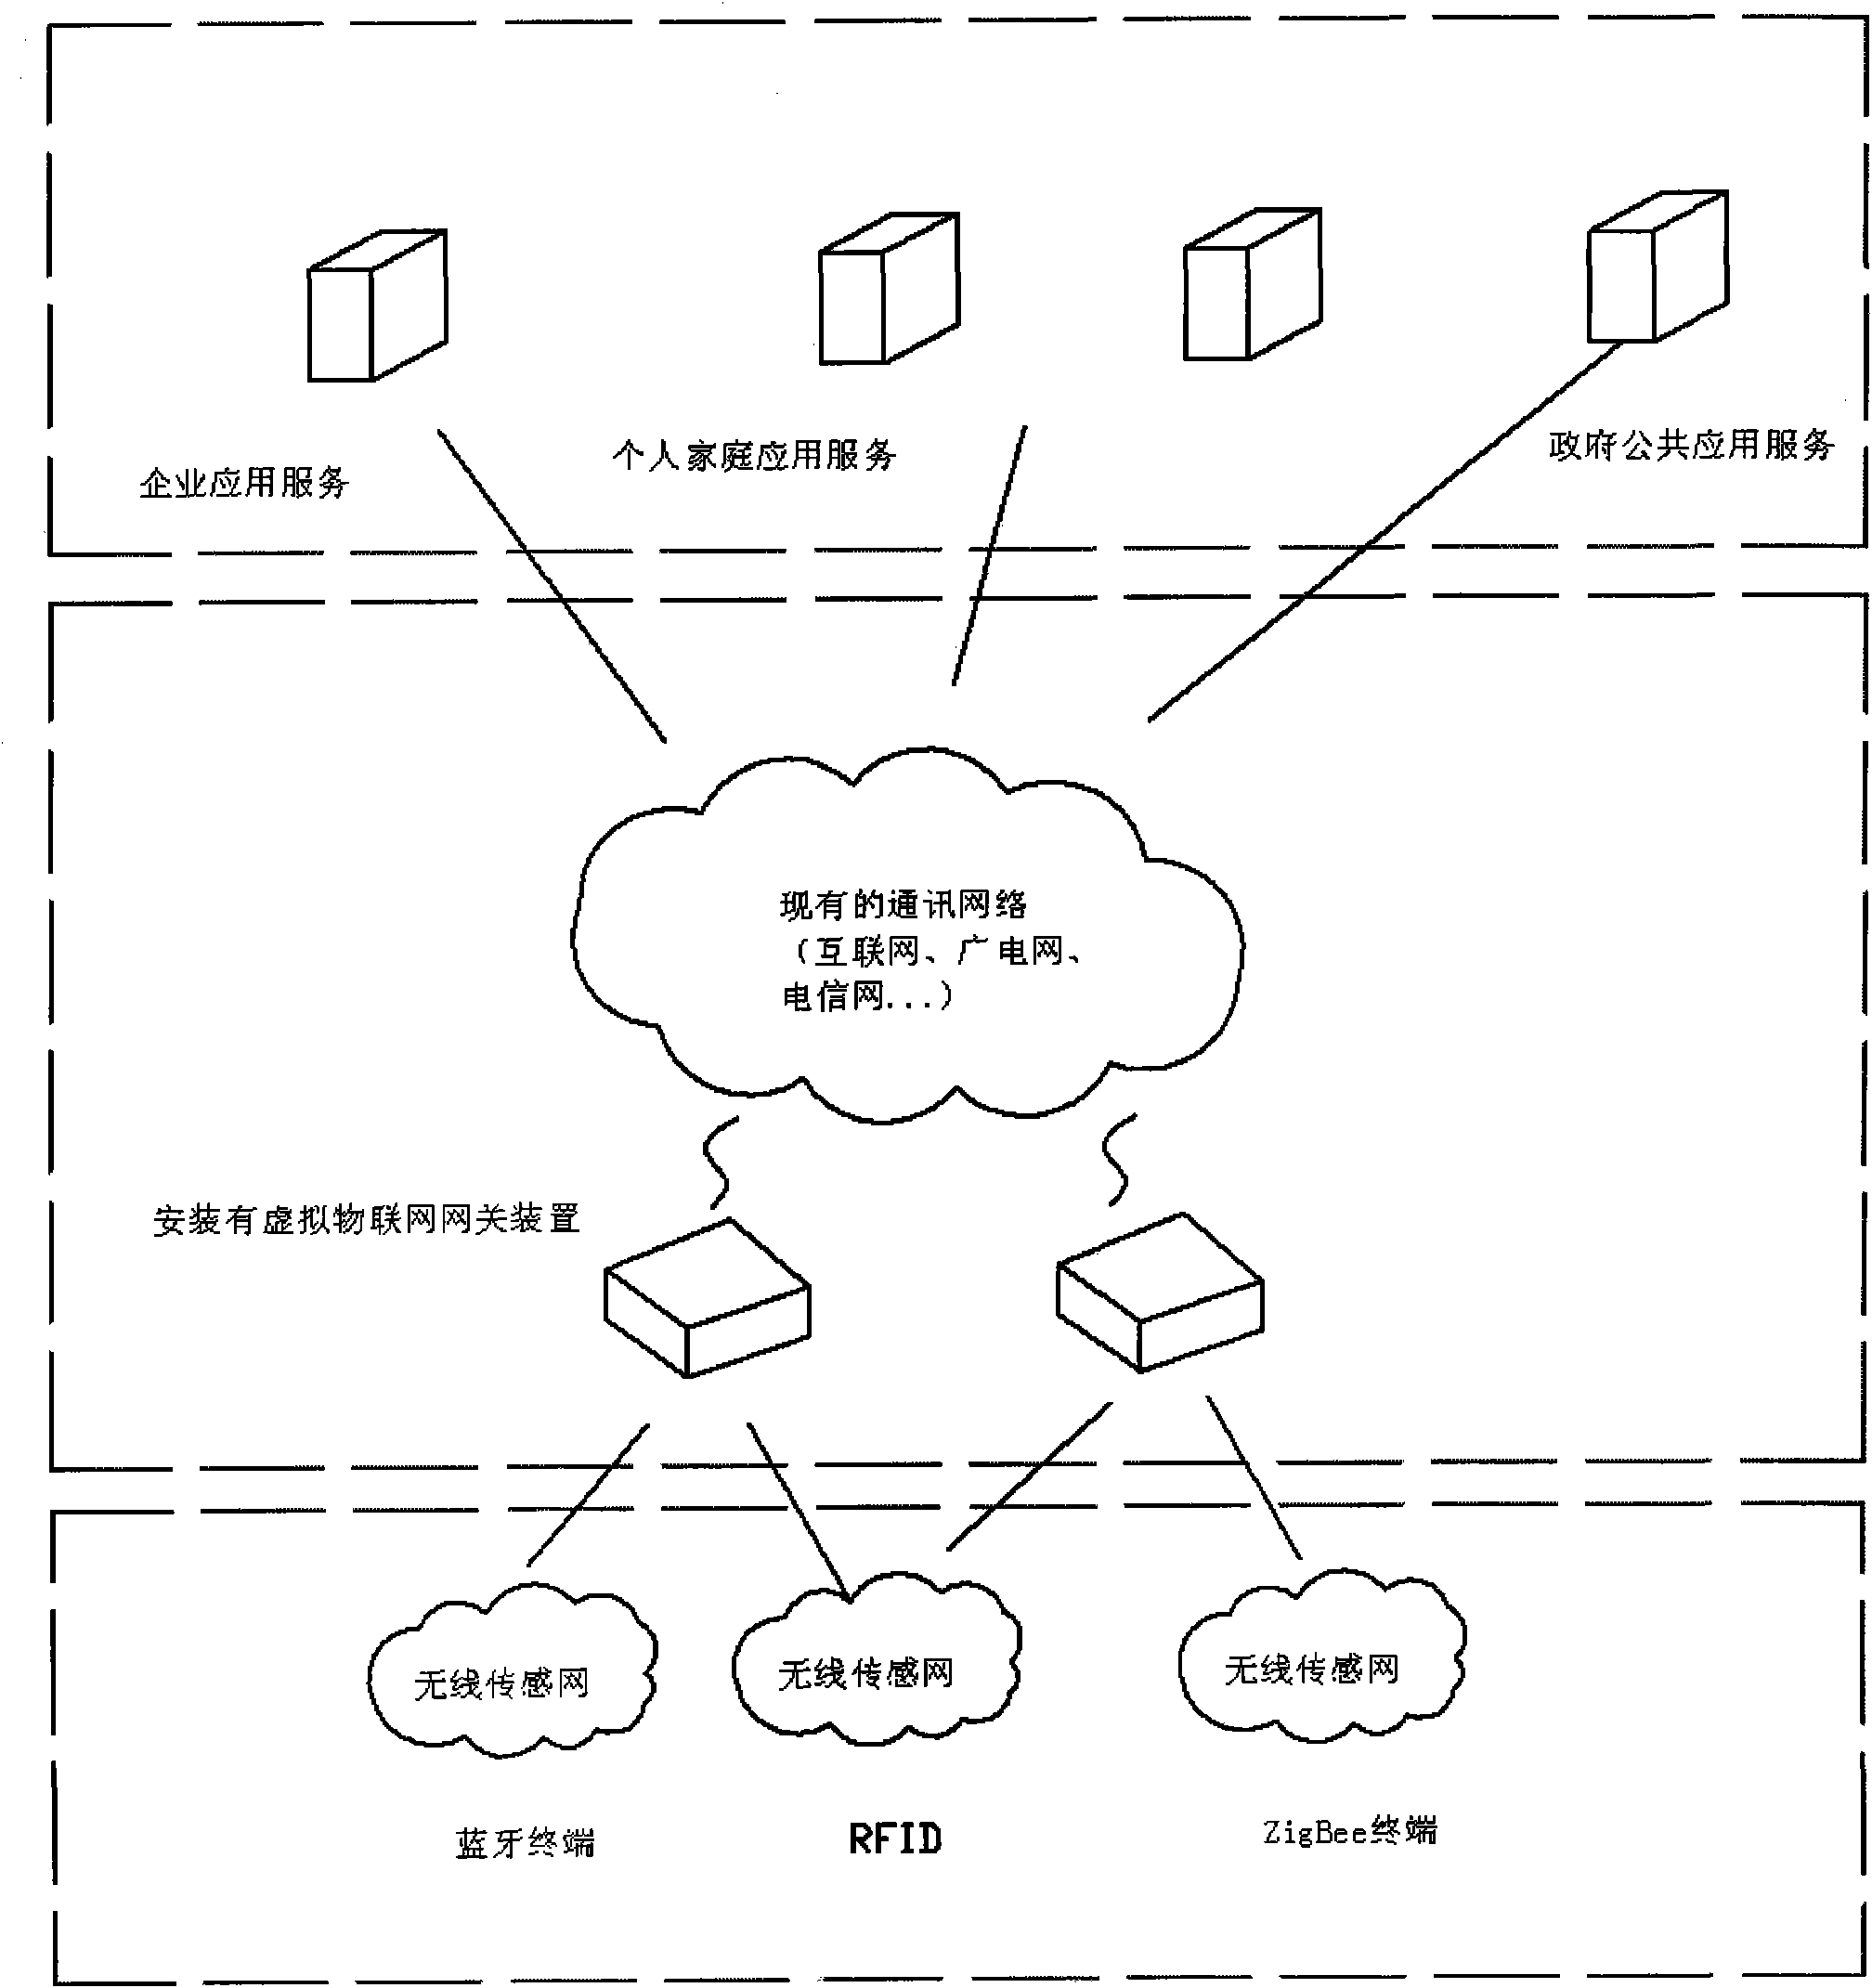 Virtual Internet-of-things gateway system capable of realizing multiprotocol and network self-adapting